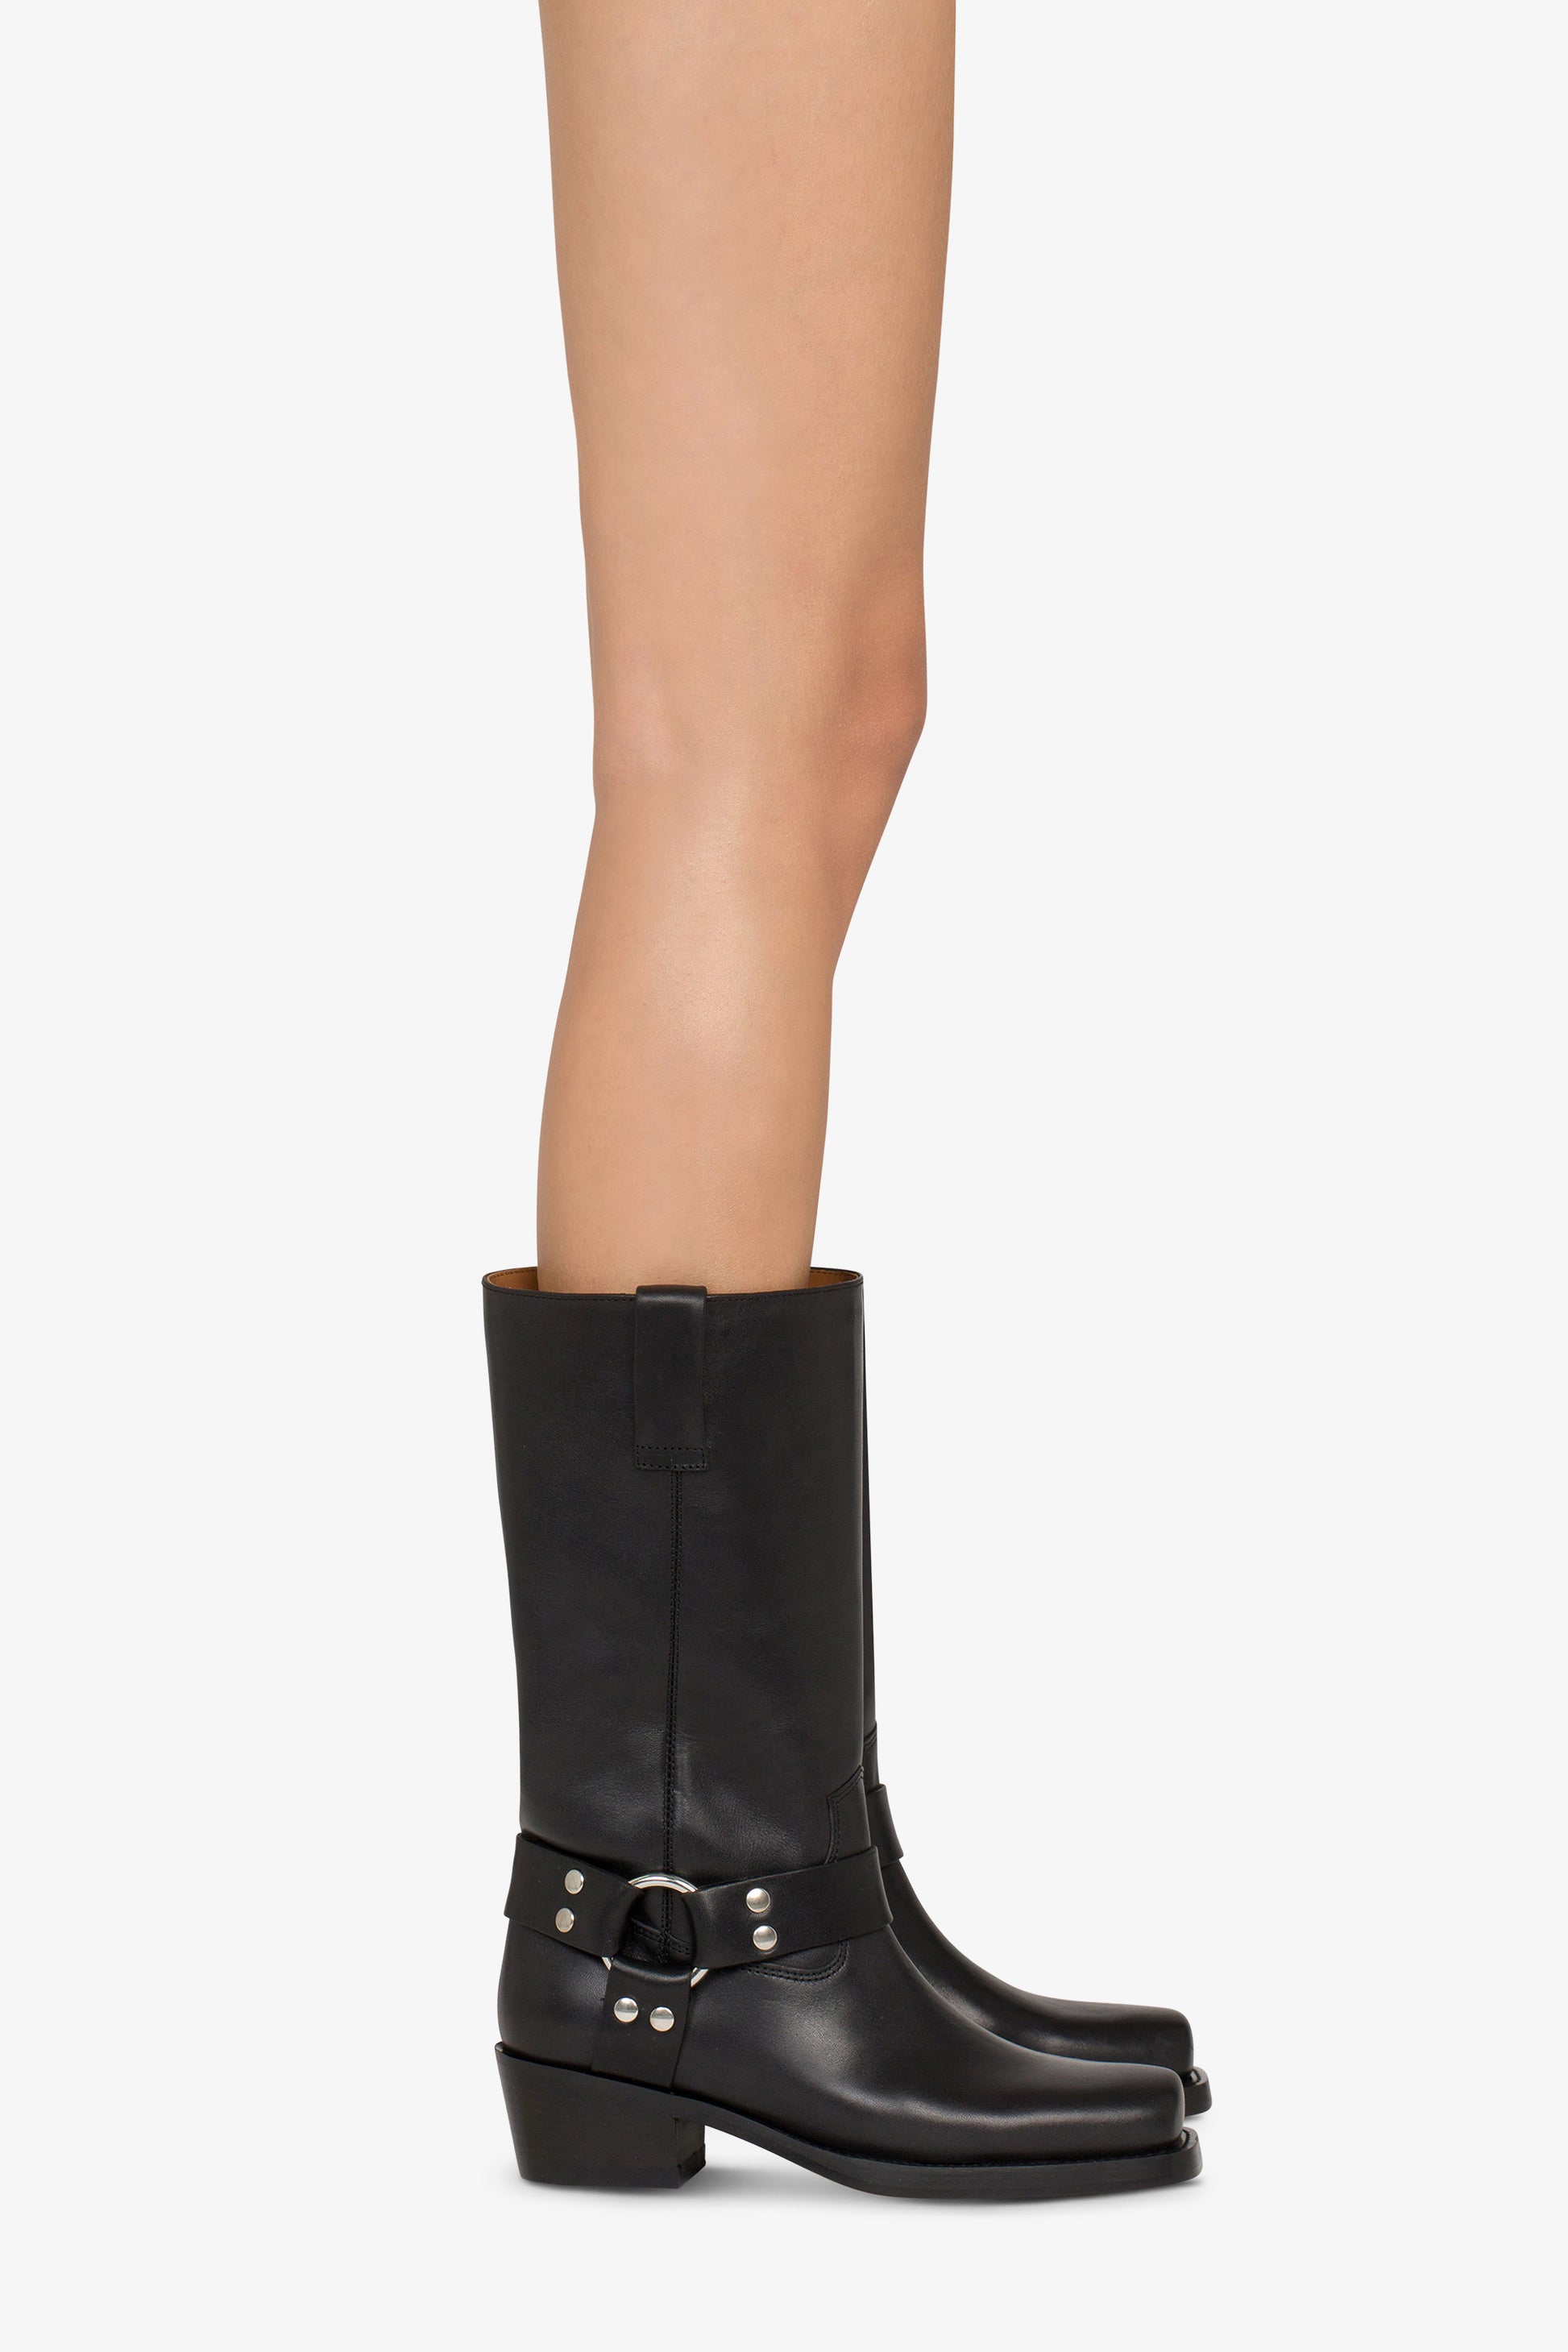 Square-toe boots in smooth black leather - Indossato